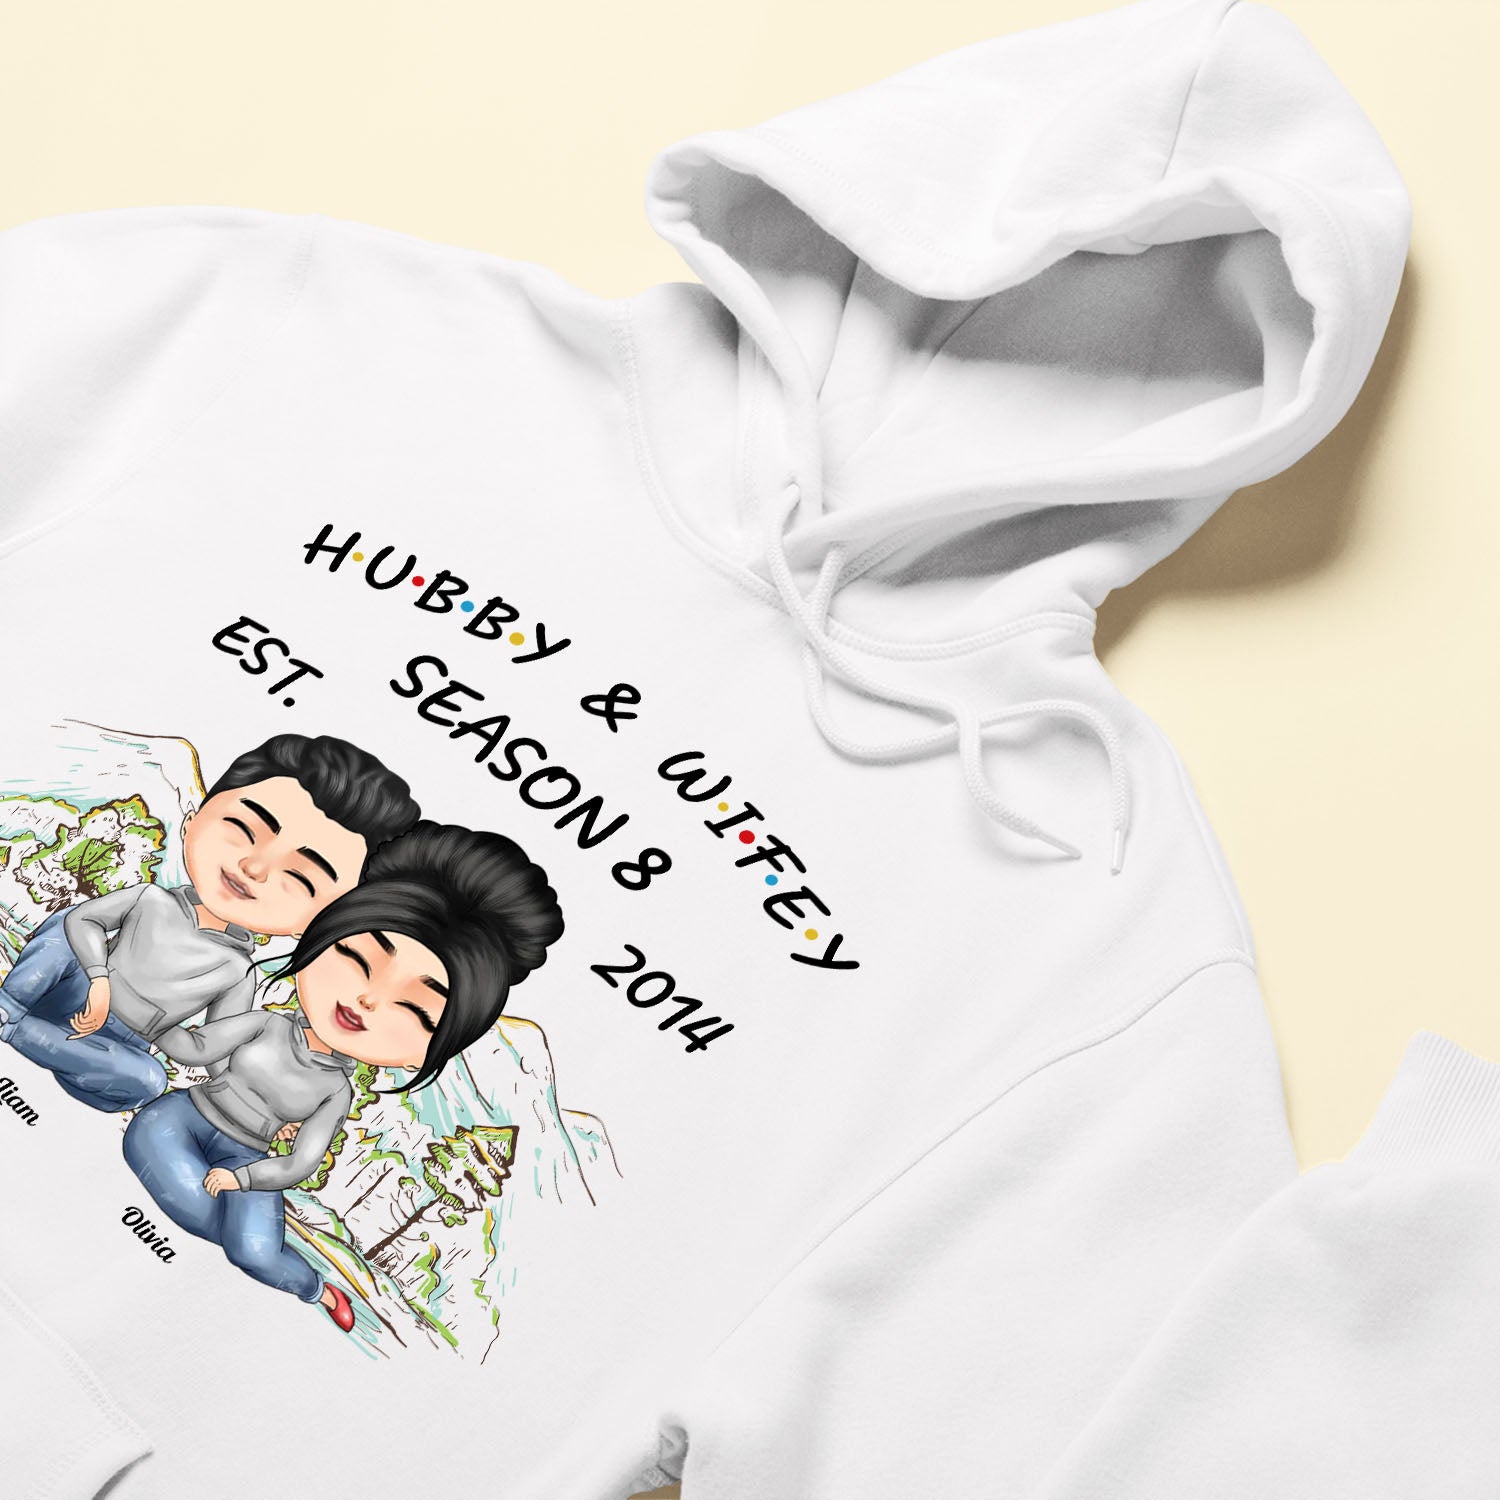 Hubby & Wifey Season - Personalized Shirt - Birthday Anniversary Gift For Husband, Wife, Gifts From Daughters, Sons To Parents